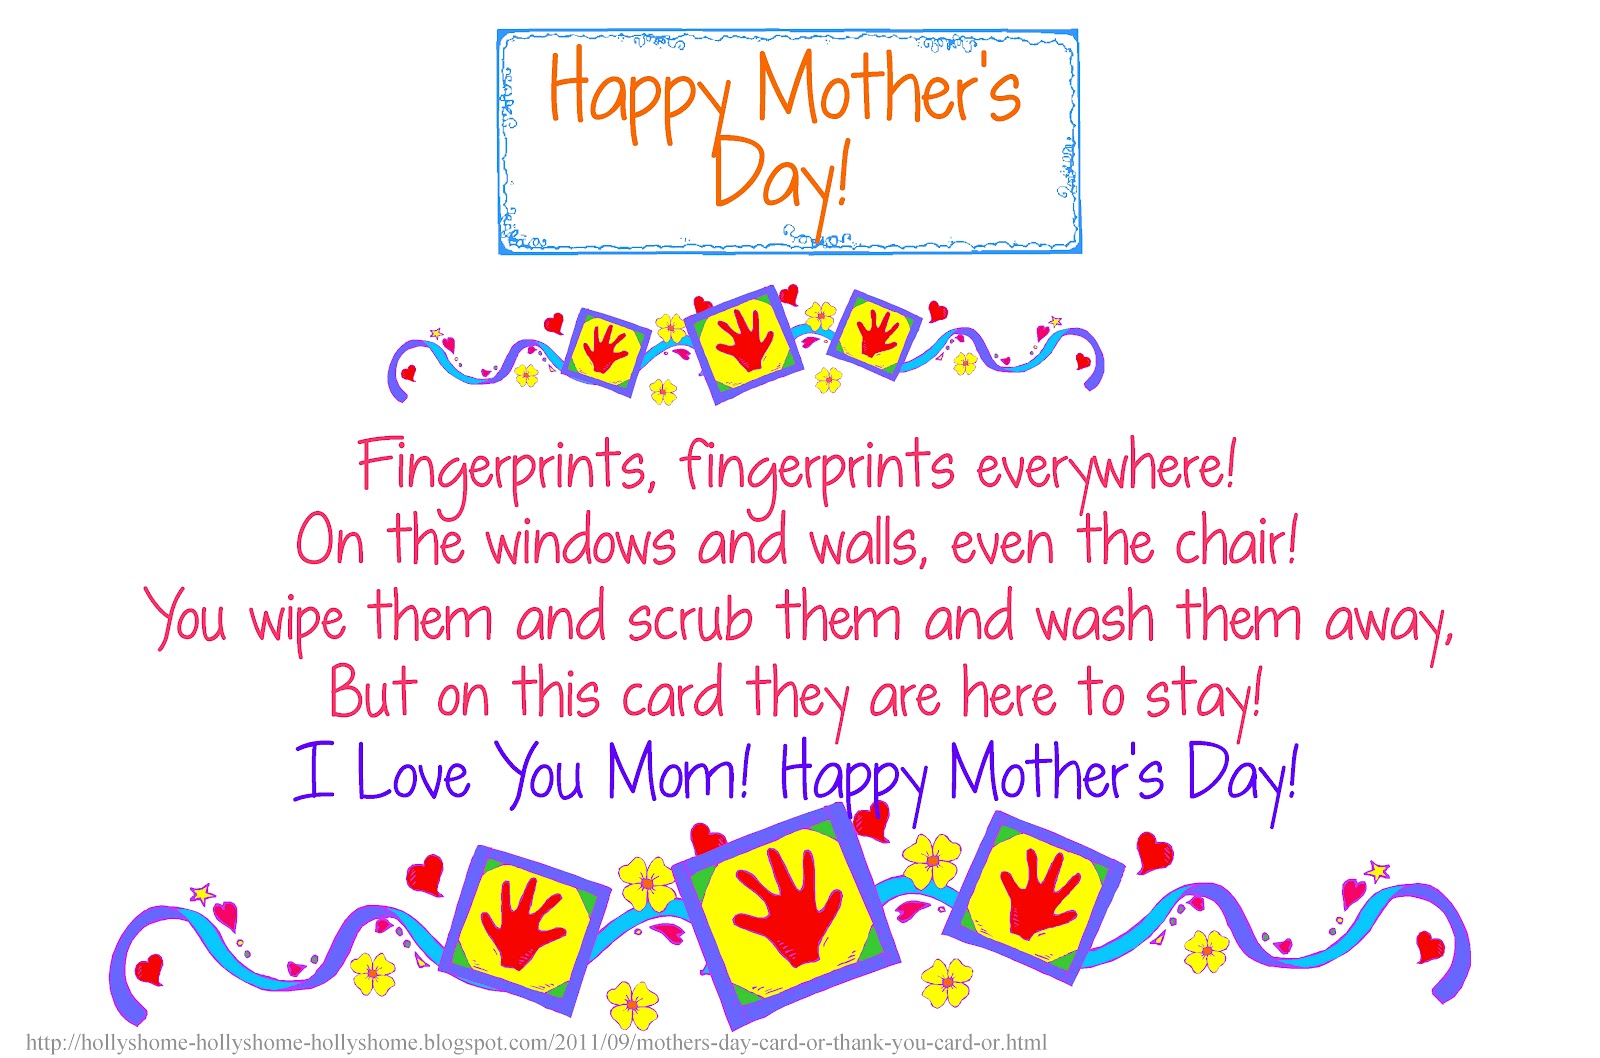 HollysHome - Church Fun: A Fingerprint Mother's Day Card (and Poem) or ...